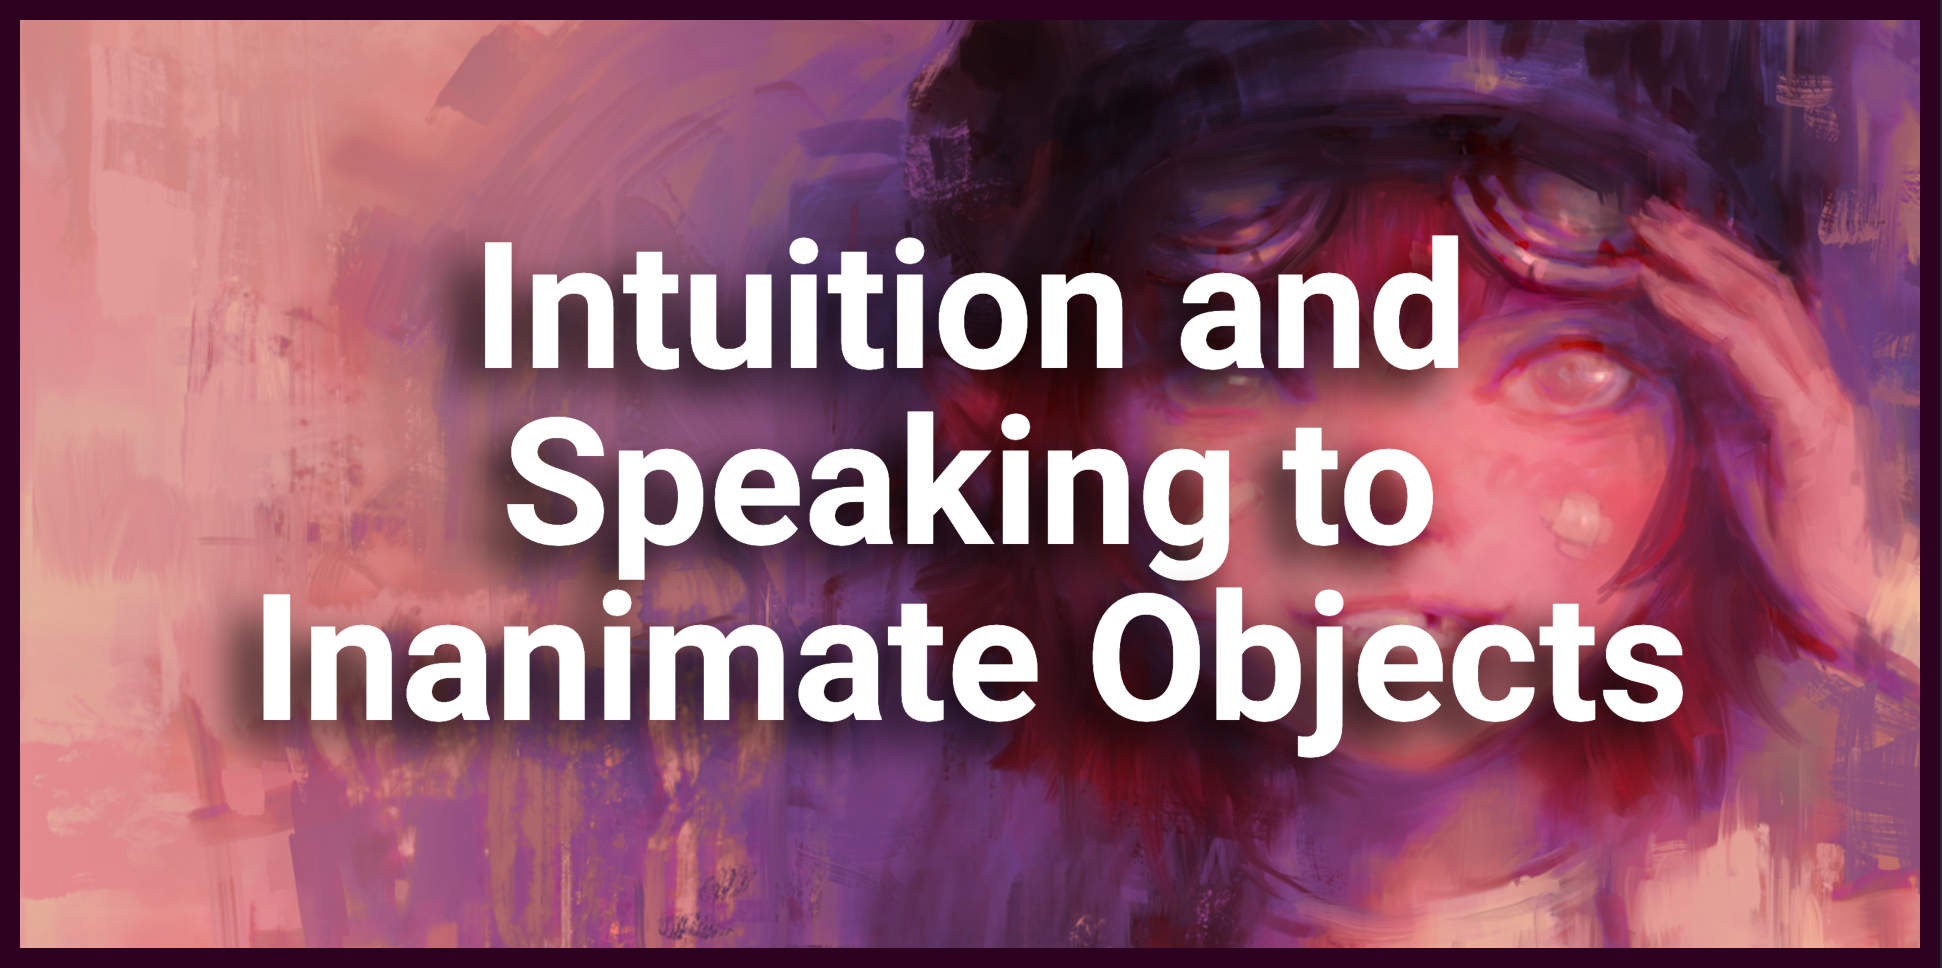 Intuition and Speaking to Inanimate Objects